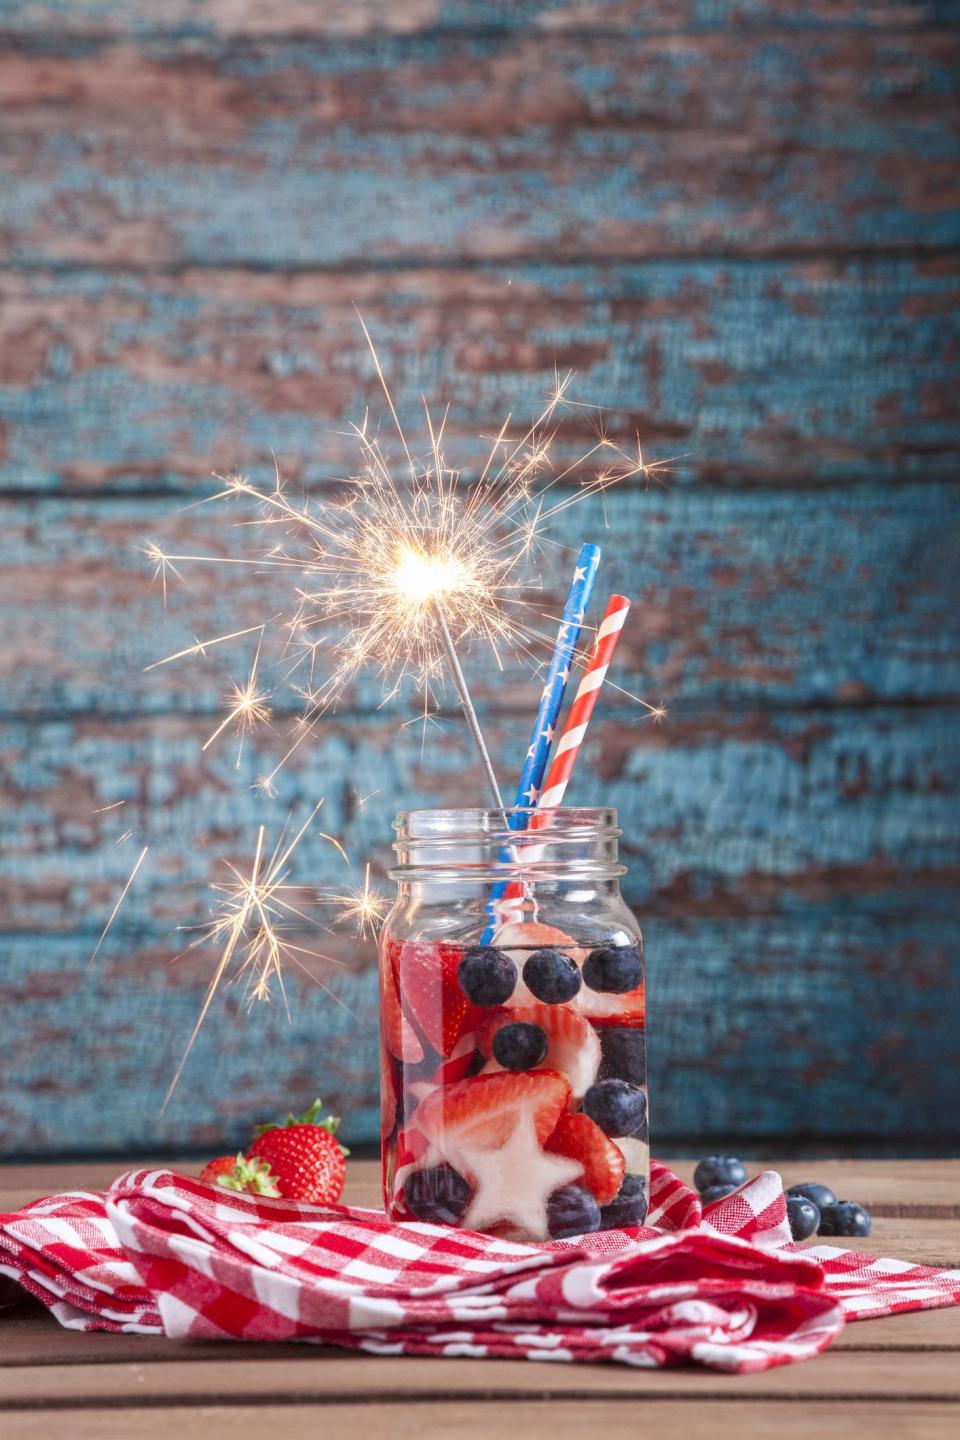 The Most Festive Fourth of July Drinks